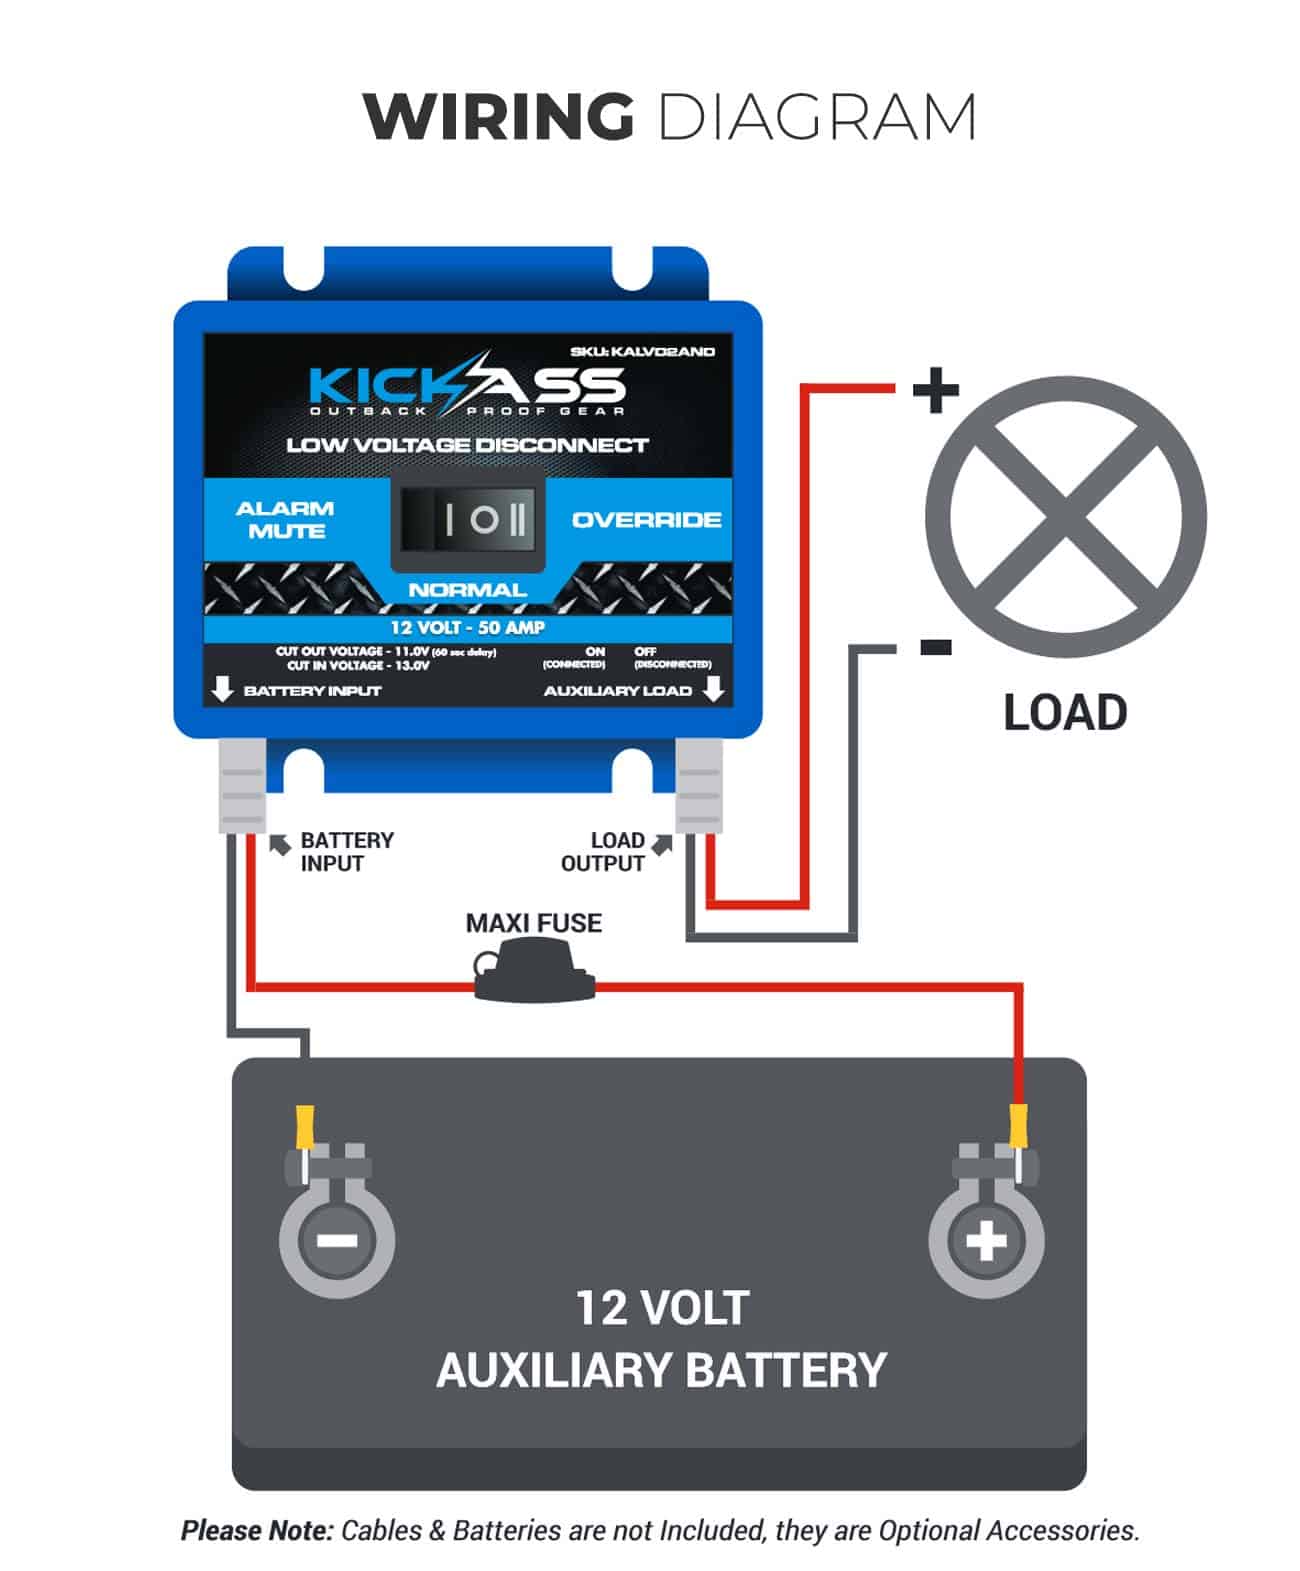 KALVD2AND - KICKASS Quick Connect Low Voltage Disconnect LVD